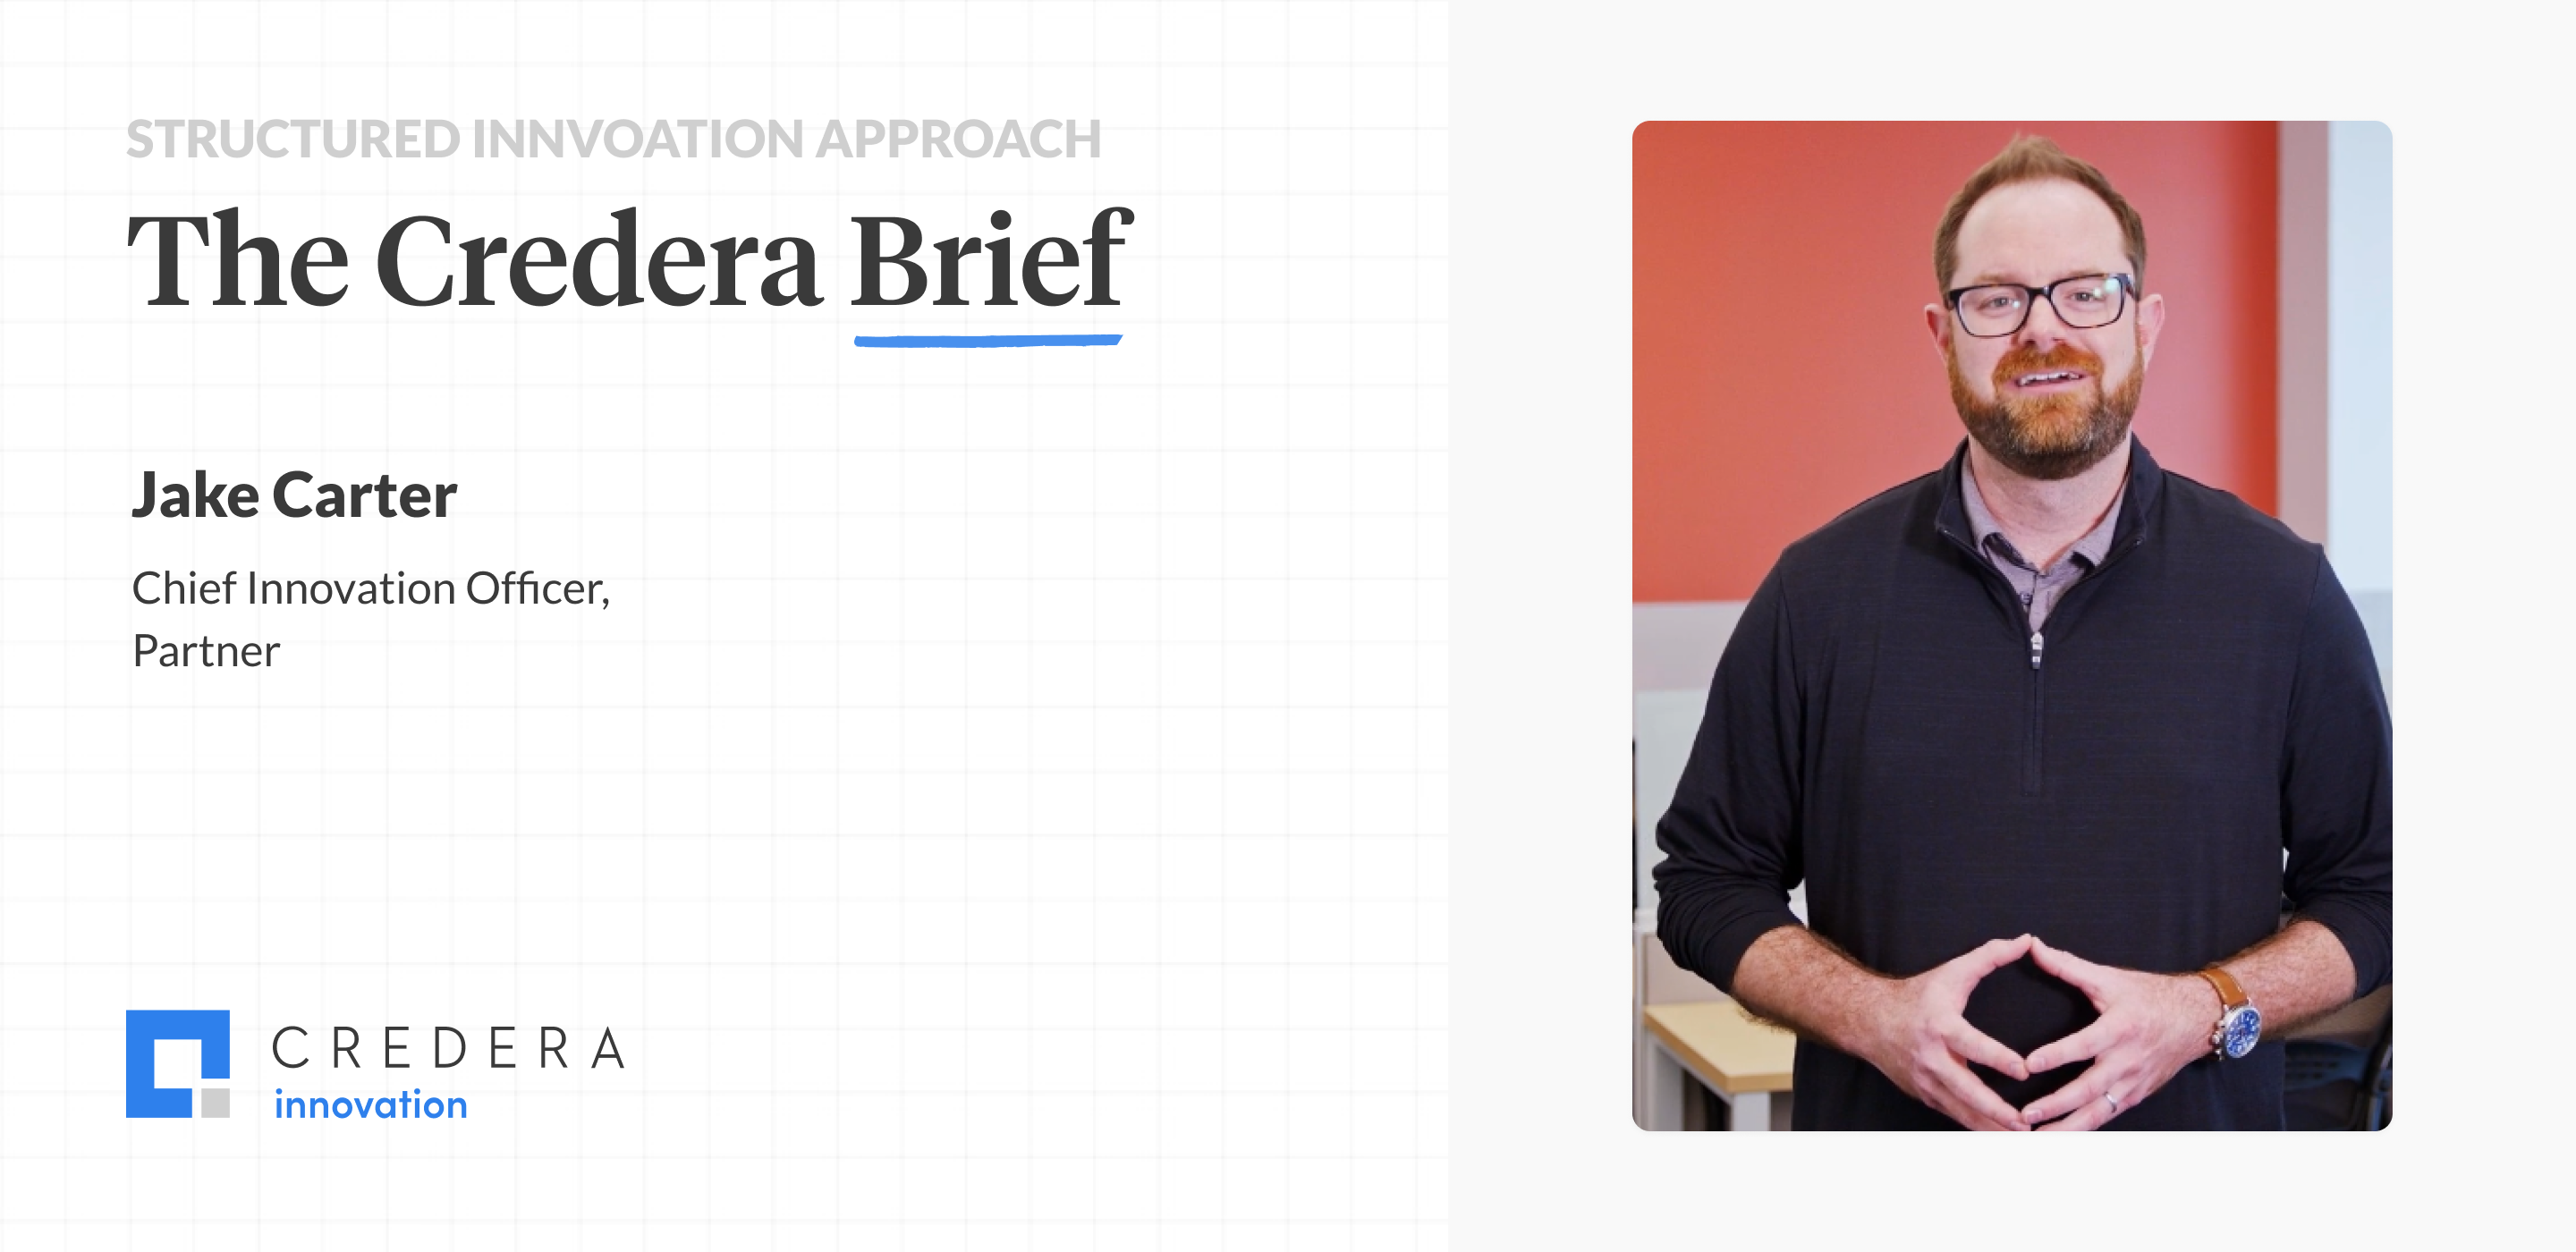 The Credera Brief The Structured Innovation Approach Credera